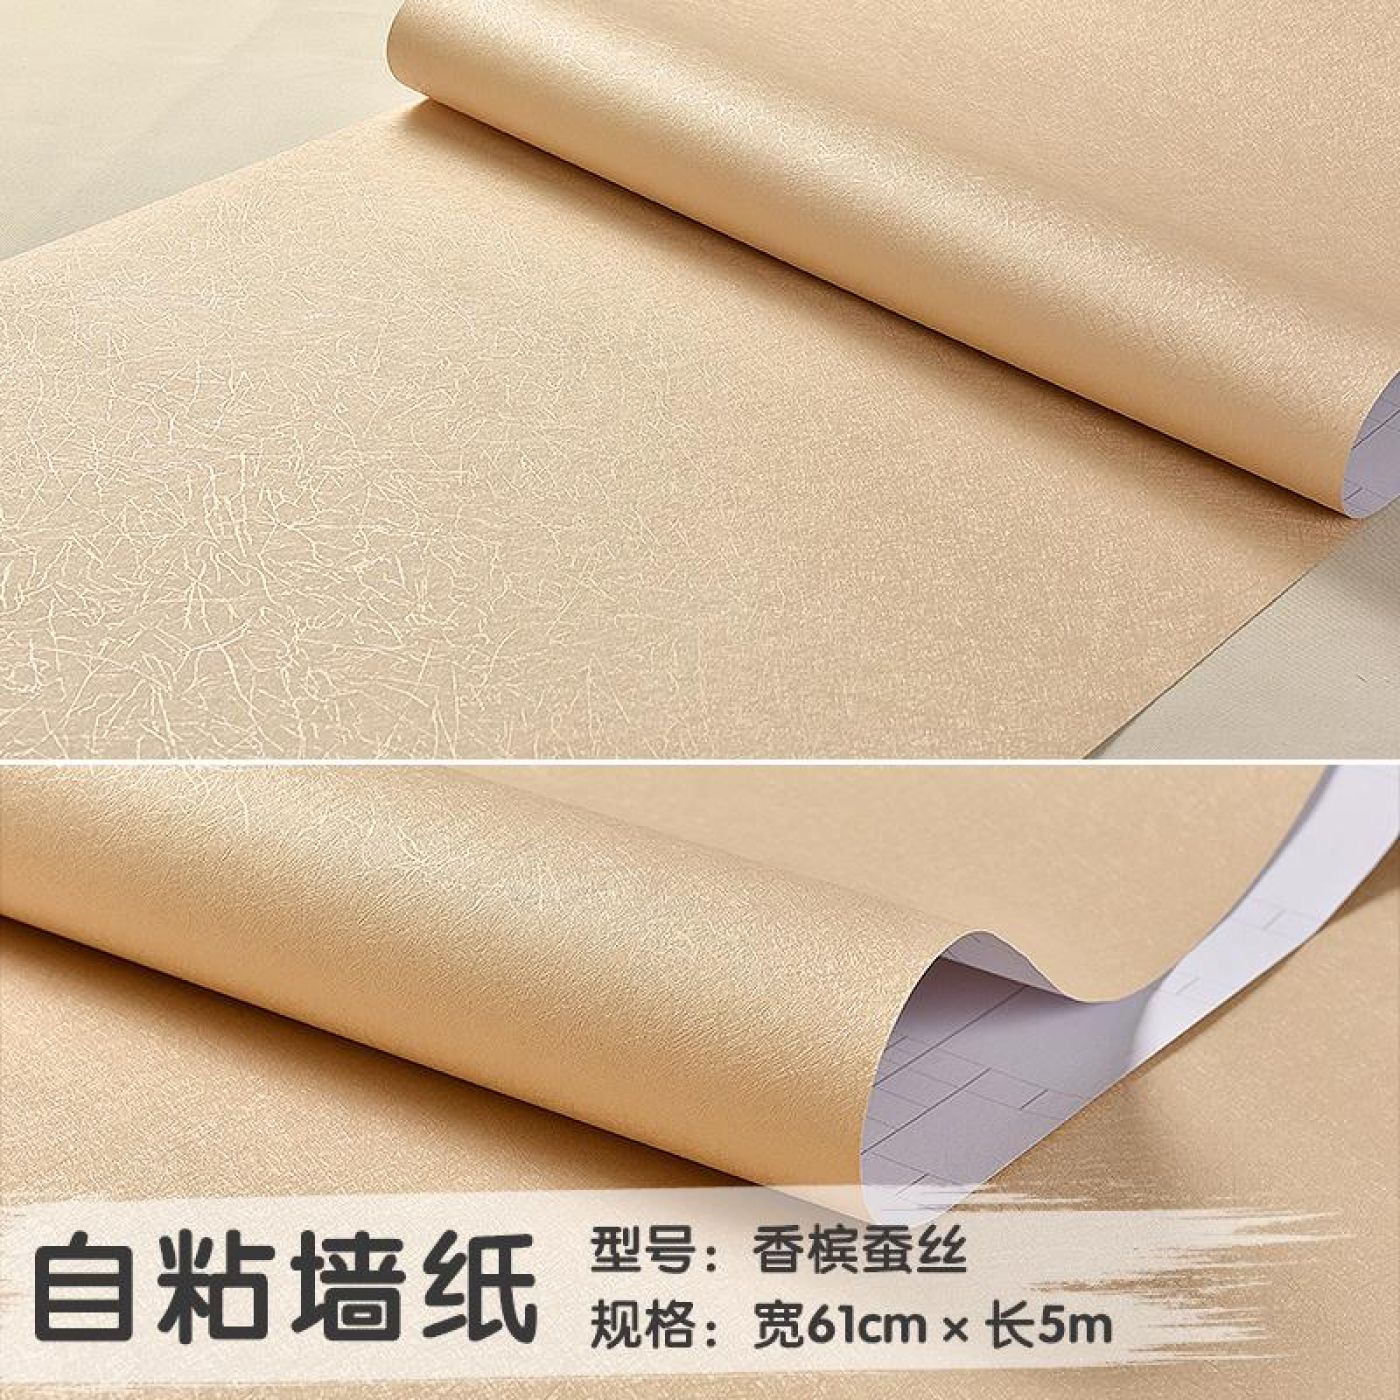 wallpaper sticker roll philippines,beige,font,textile,paper,material property